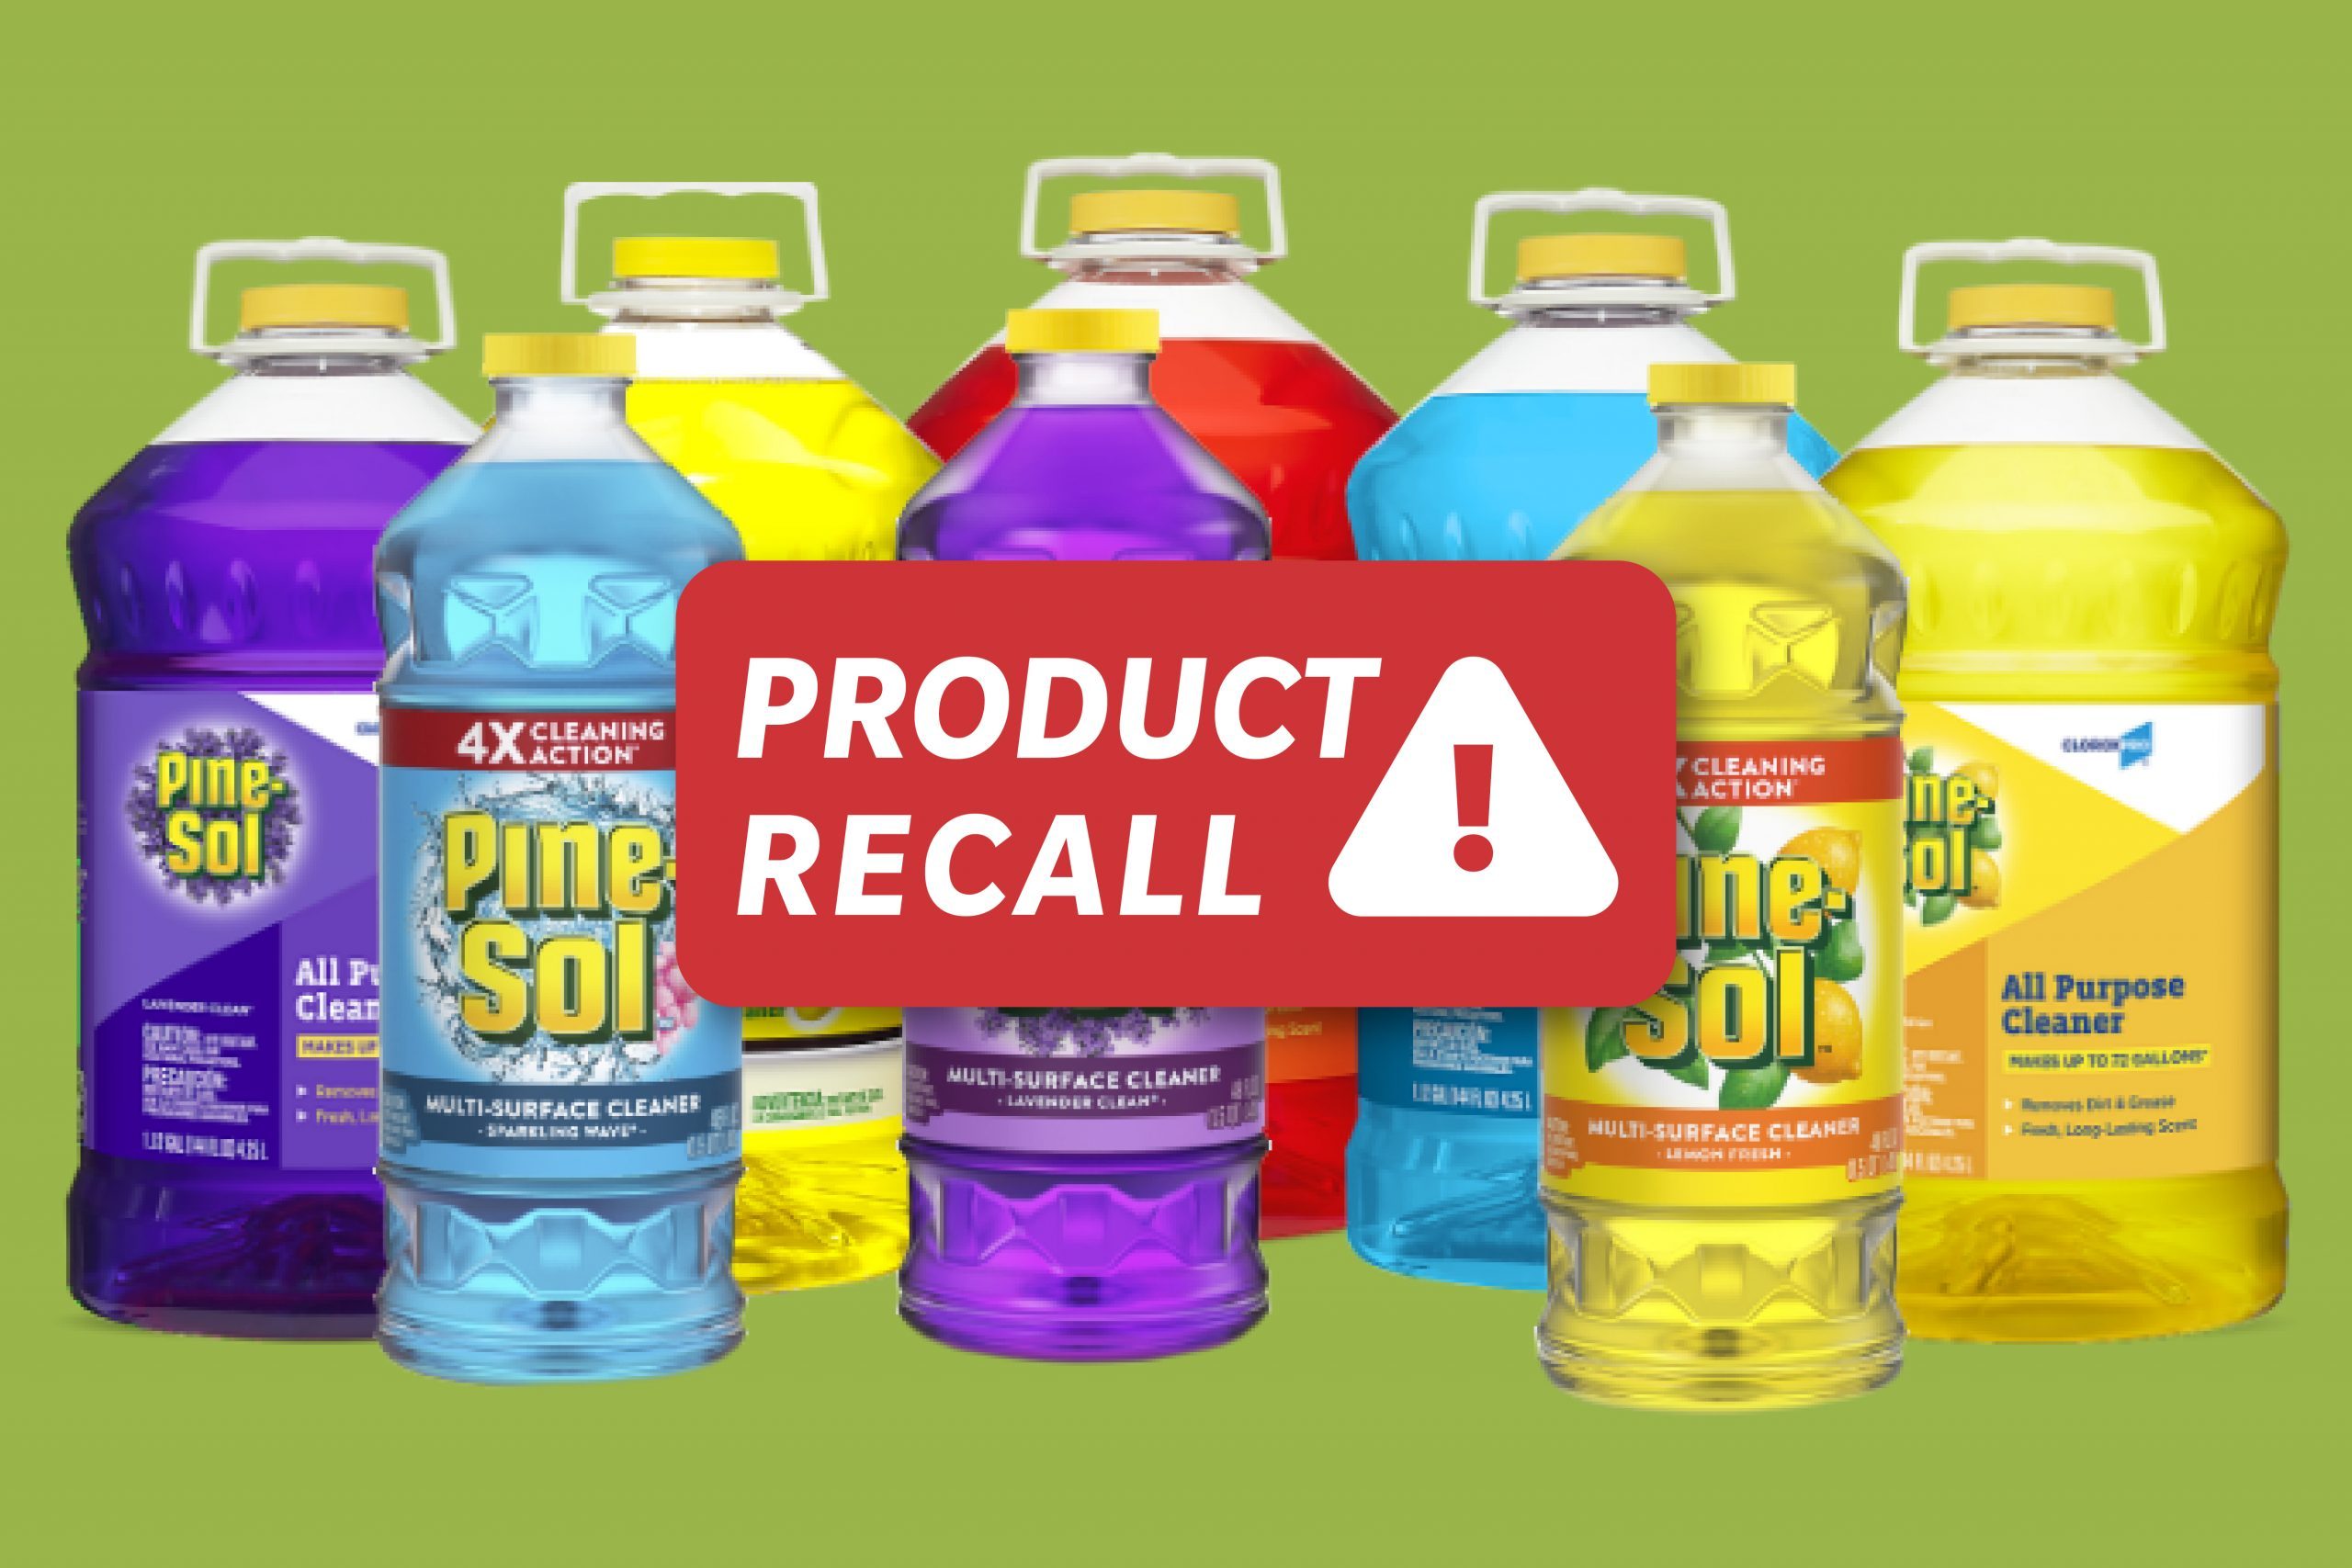 Clorox Has Recalled 37 Million PineSol Products Over InfectionCausing